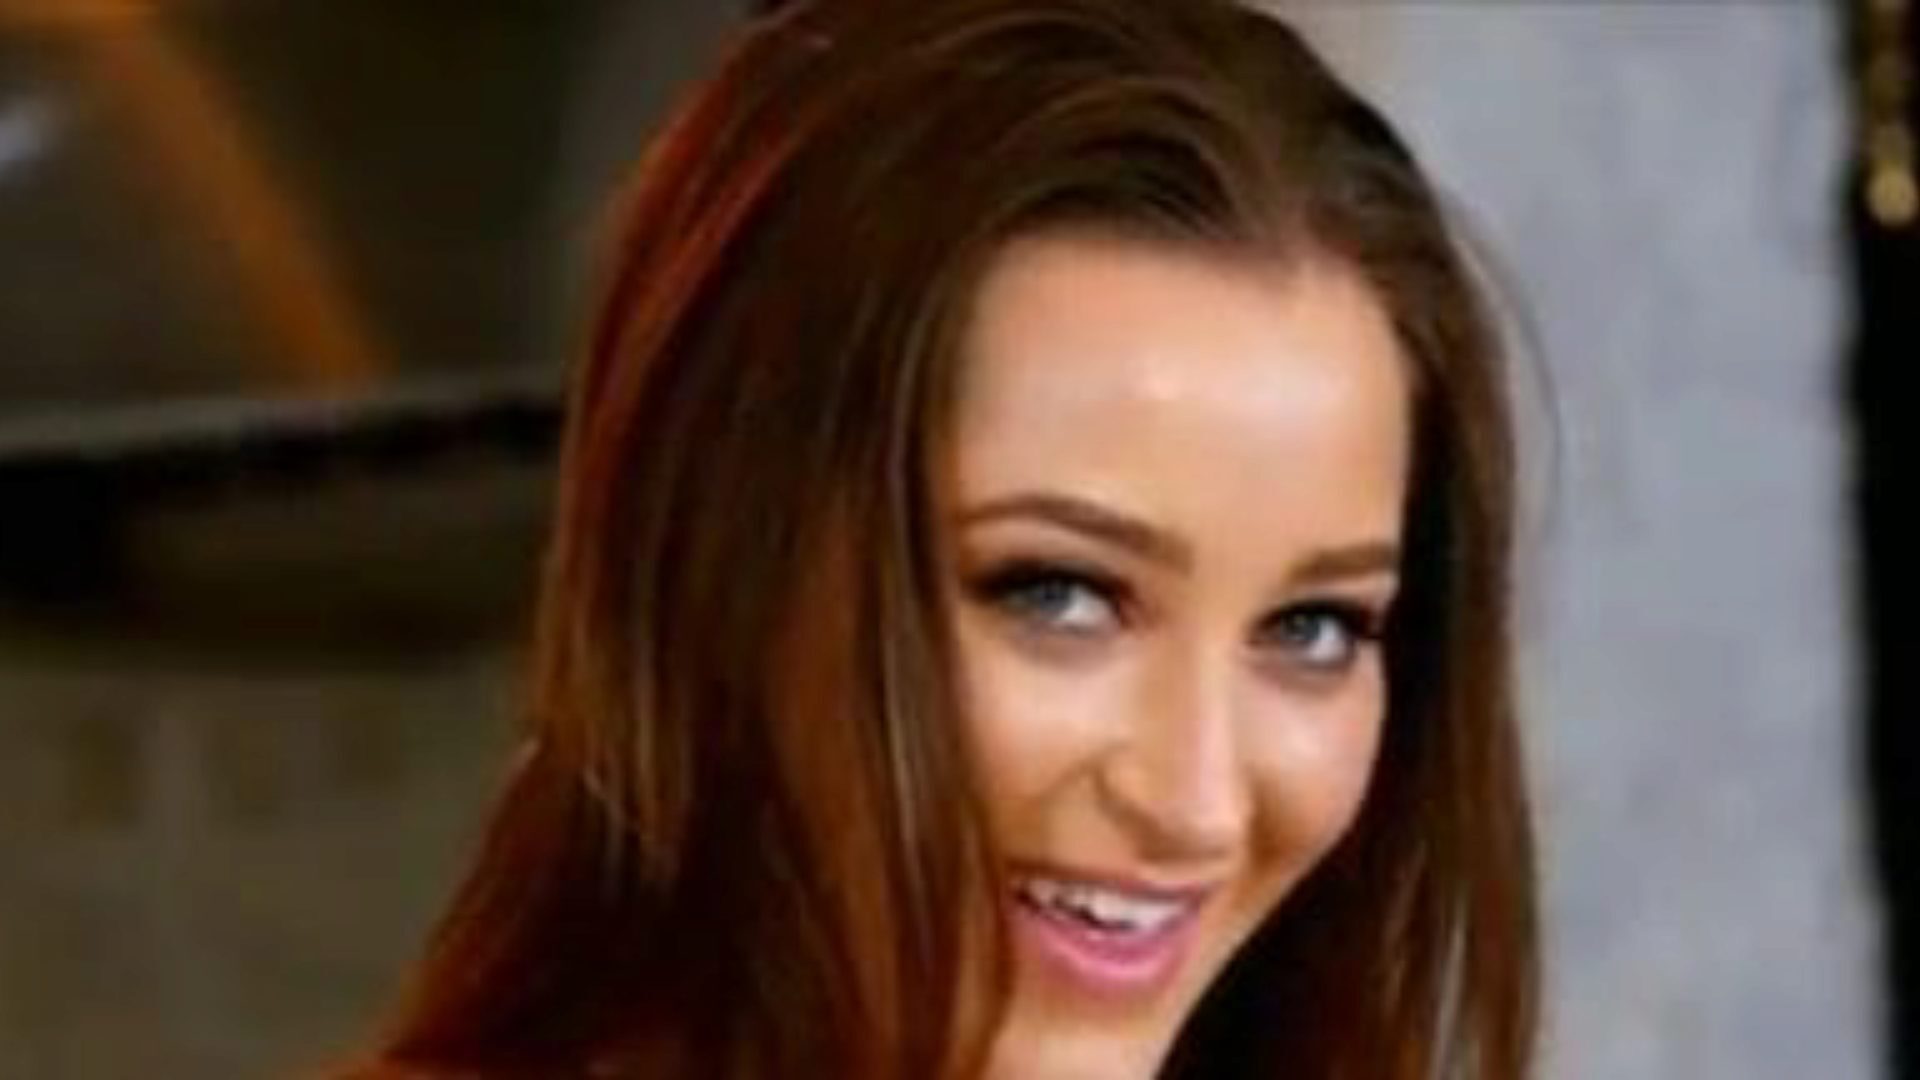 Dani Daniels Solo Cooking, Free Hot Striptease Porn Video 85 Watch Dani Daniels Solo Cooking video on xHamster, the hottest fuck-a-thon tube web resource with tons of free-for-all Hot Striptease Hot Strip & Sexy pornography vids